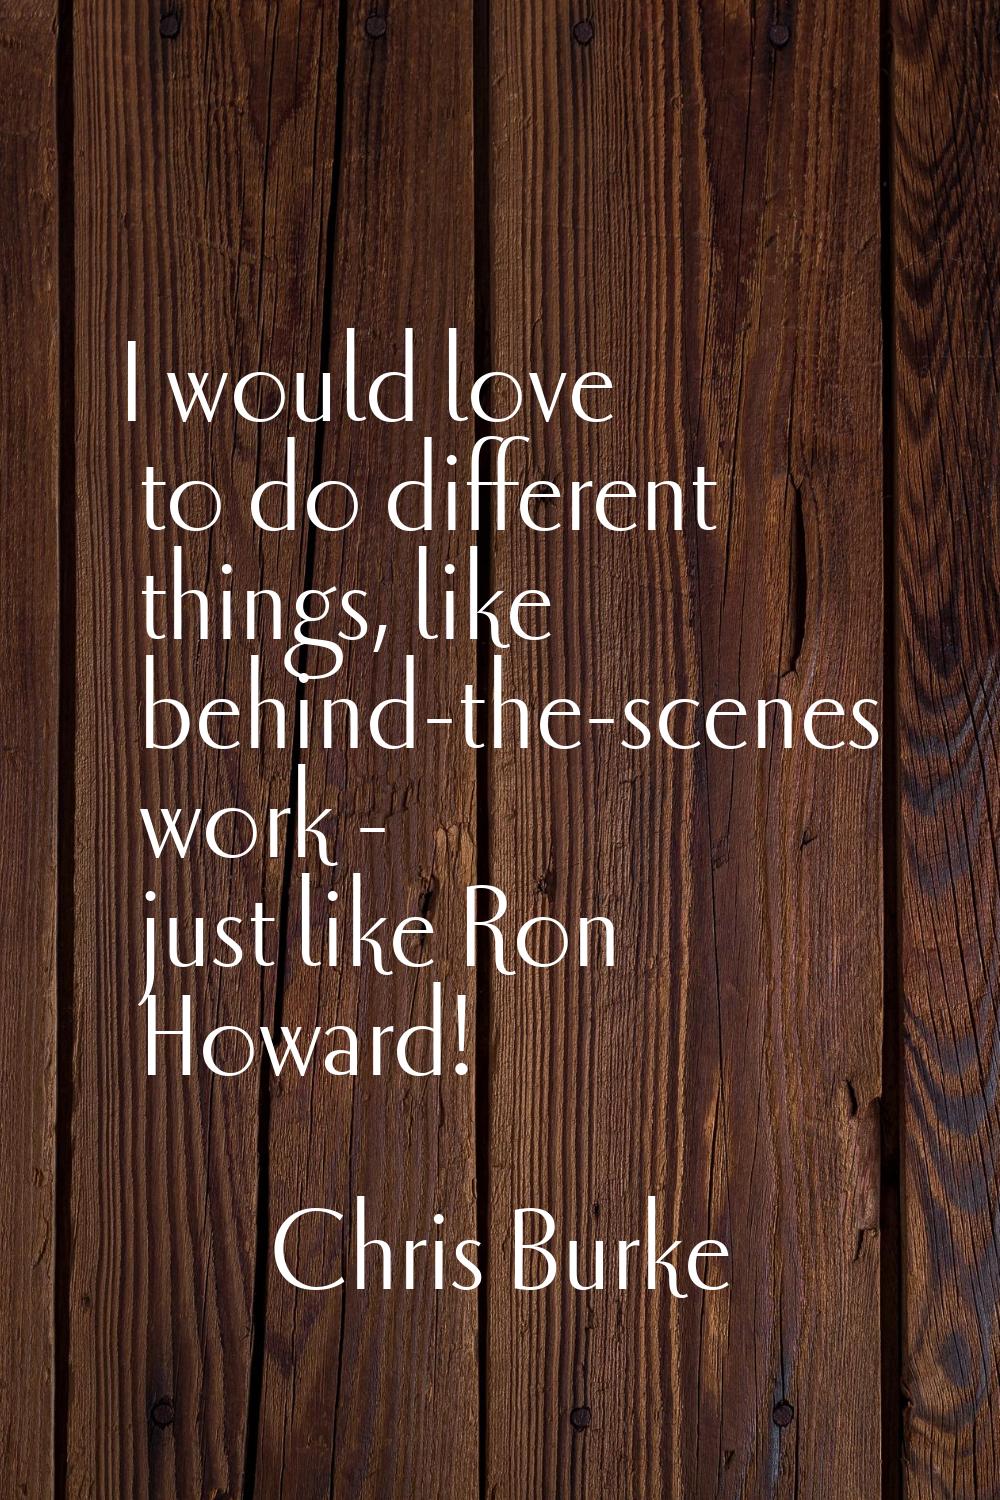 I would love to do different things, like behind-the-scenes work - just like Ron Howard!